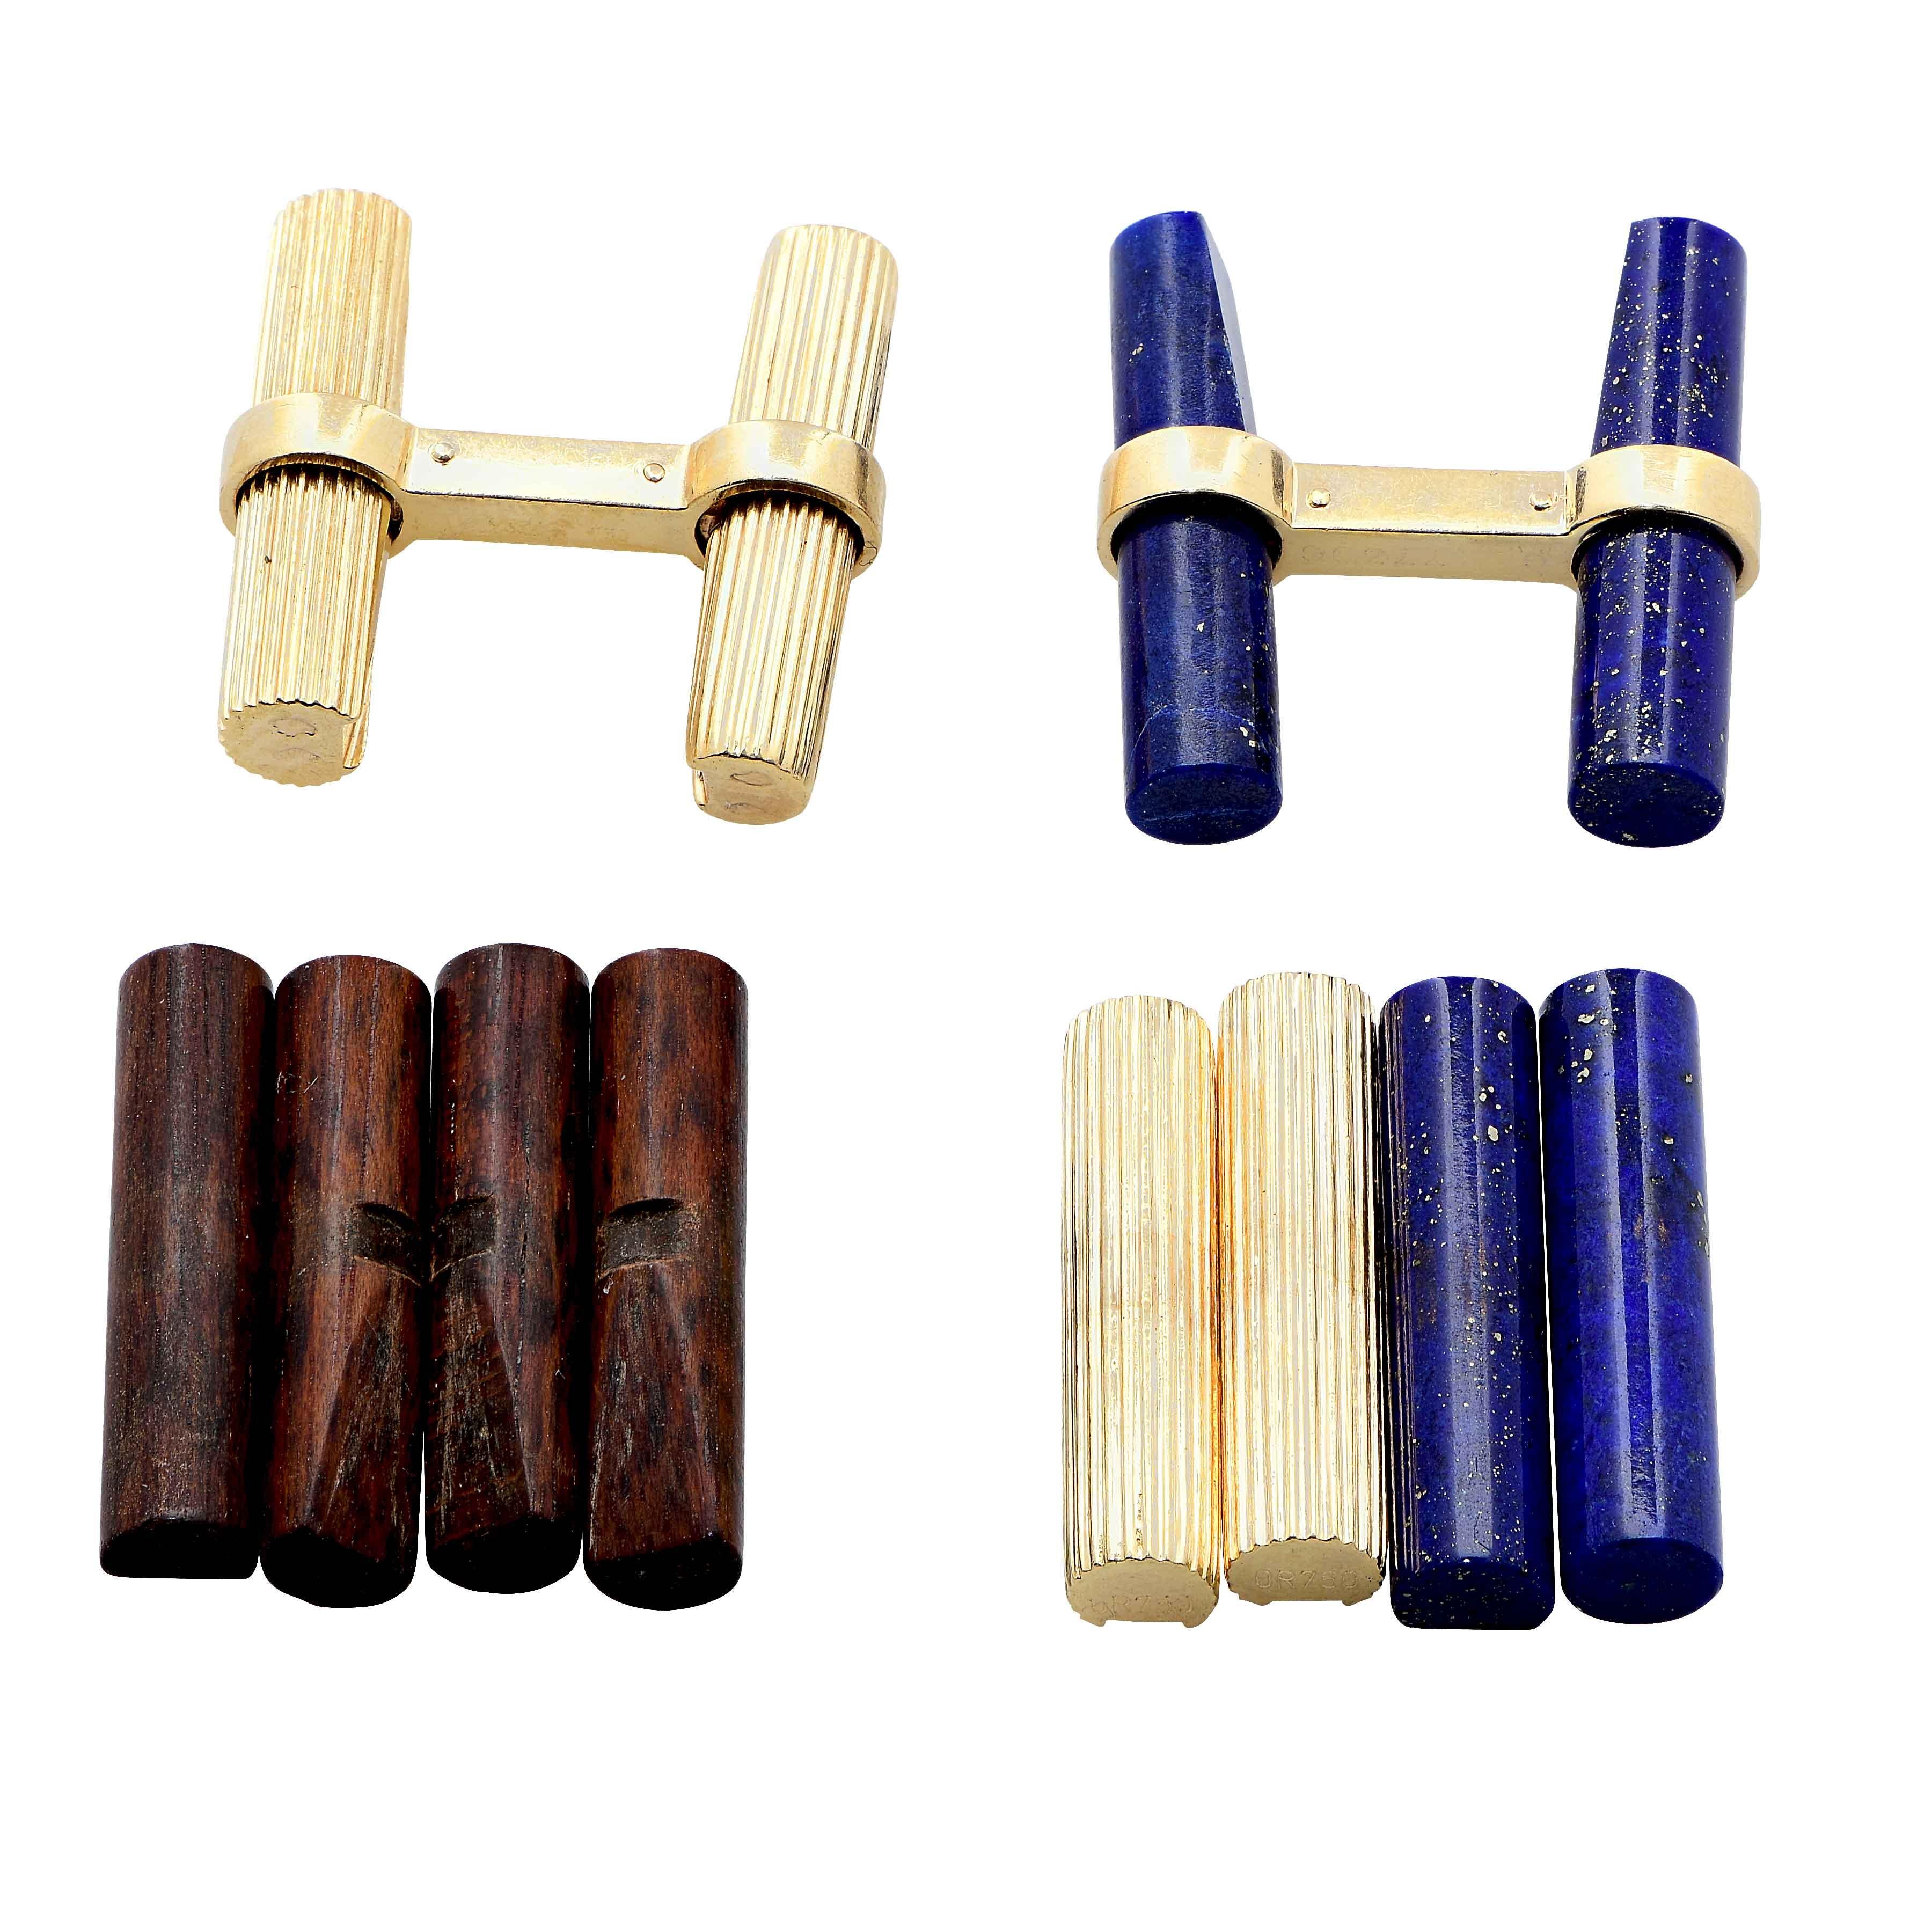 Vintage Cartier Cufflinks with interchangeable Lapis Lazuli and Wood Batons. Circa 1960's
French Assay marks and Cartier Signature, Pouch for batons included.
Metal Type: 18 Karat Yellow Gold 
Metal Weight: 15.2 Grams
